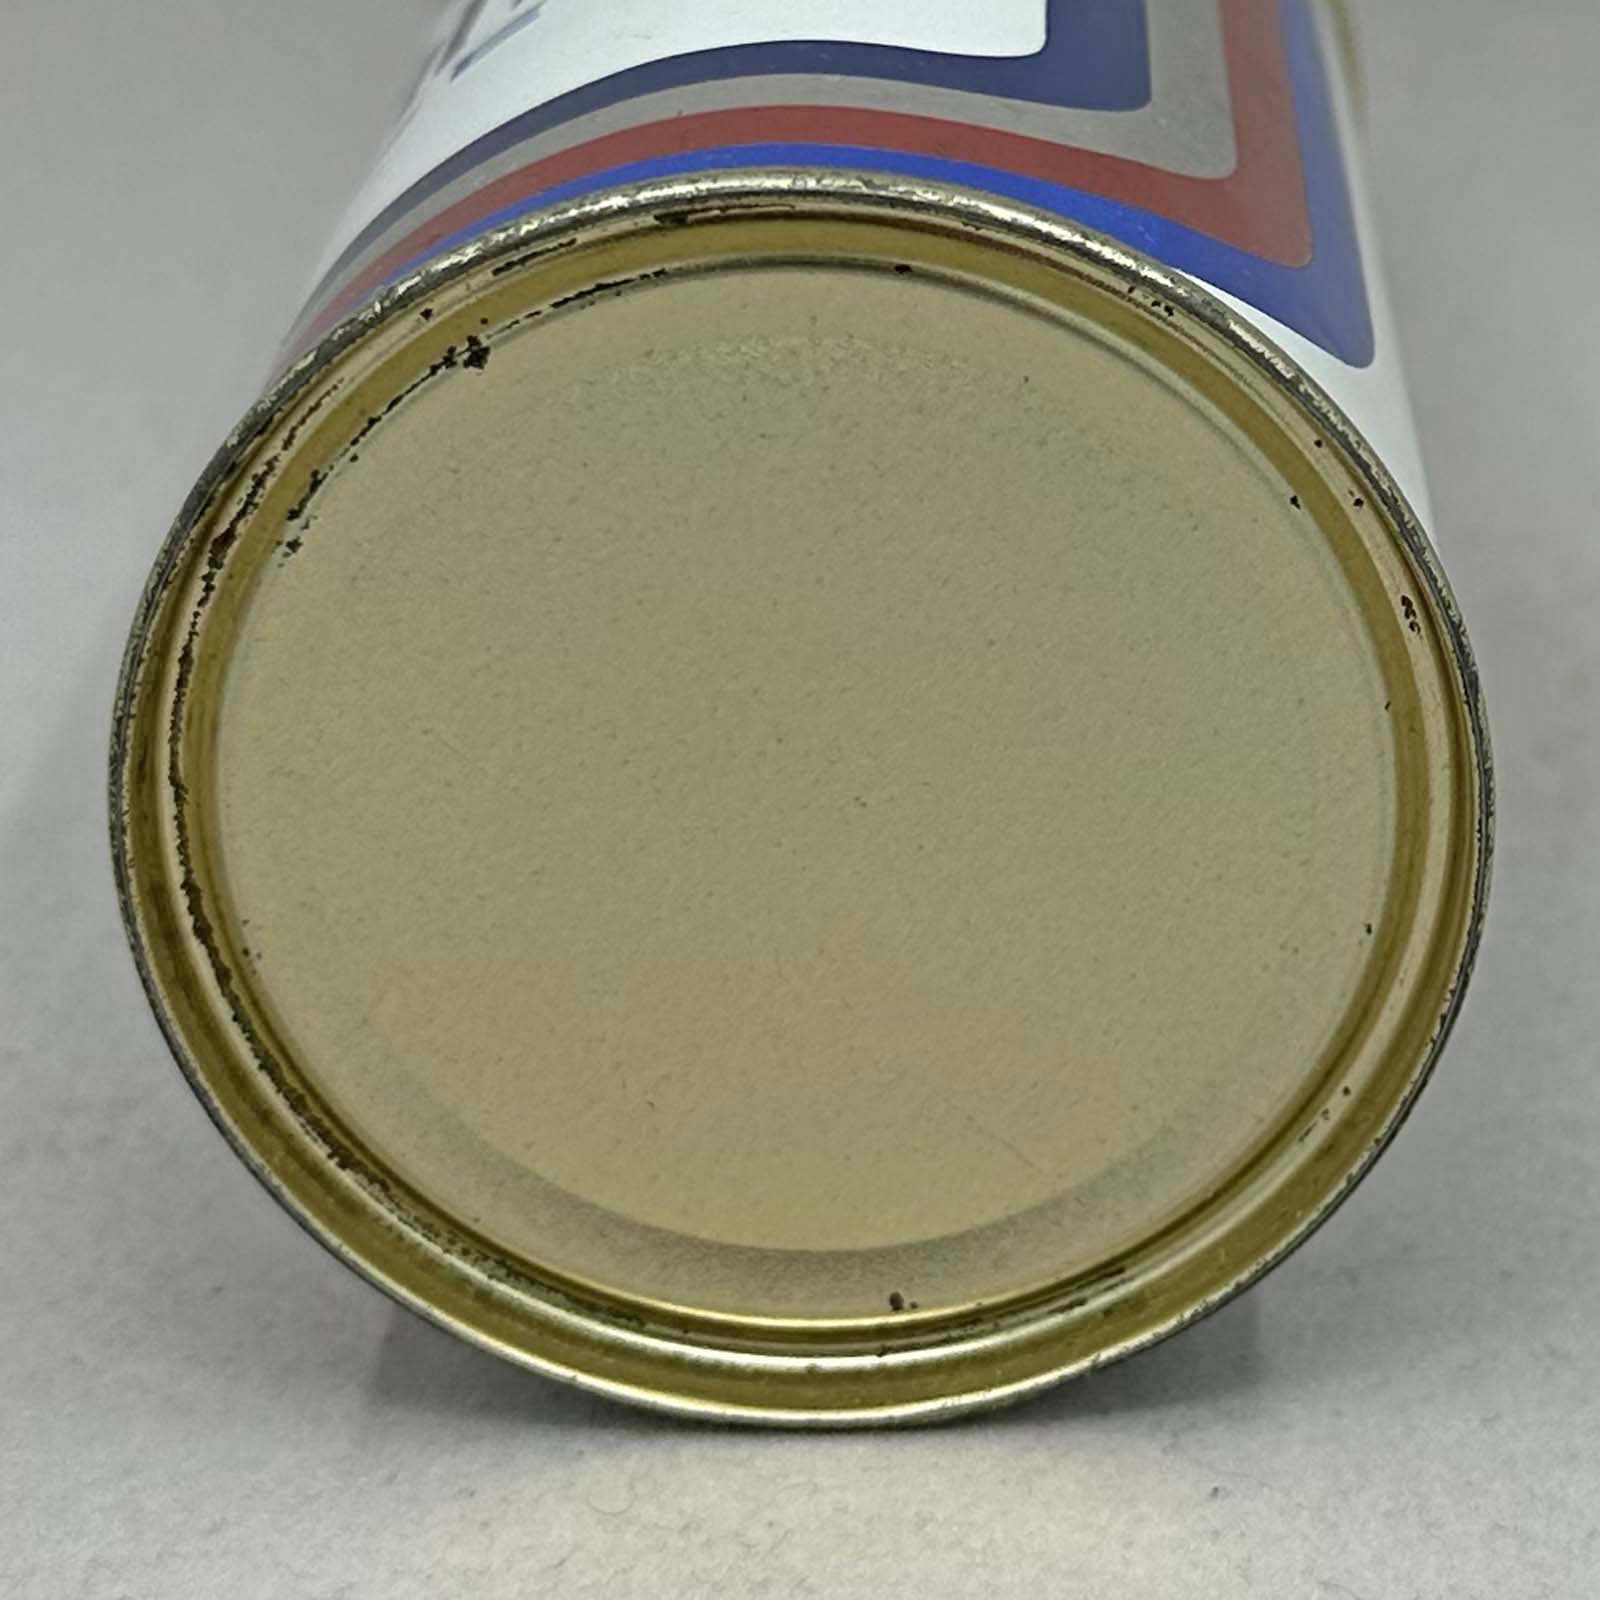 mark v 91-23 pull tab beer can 6